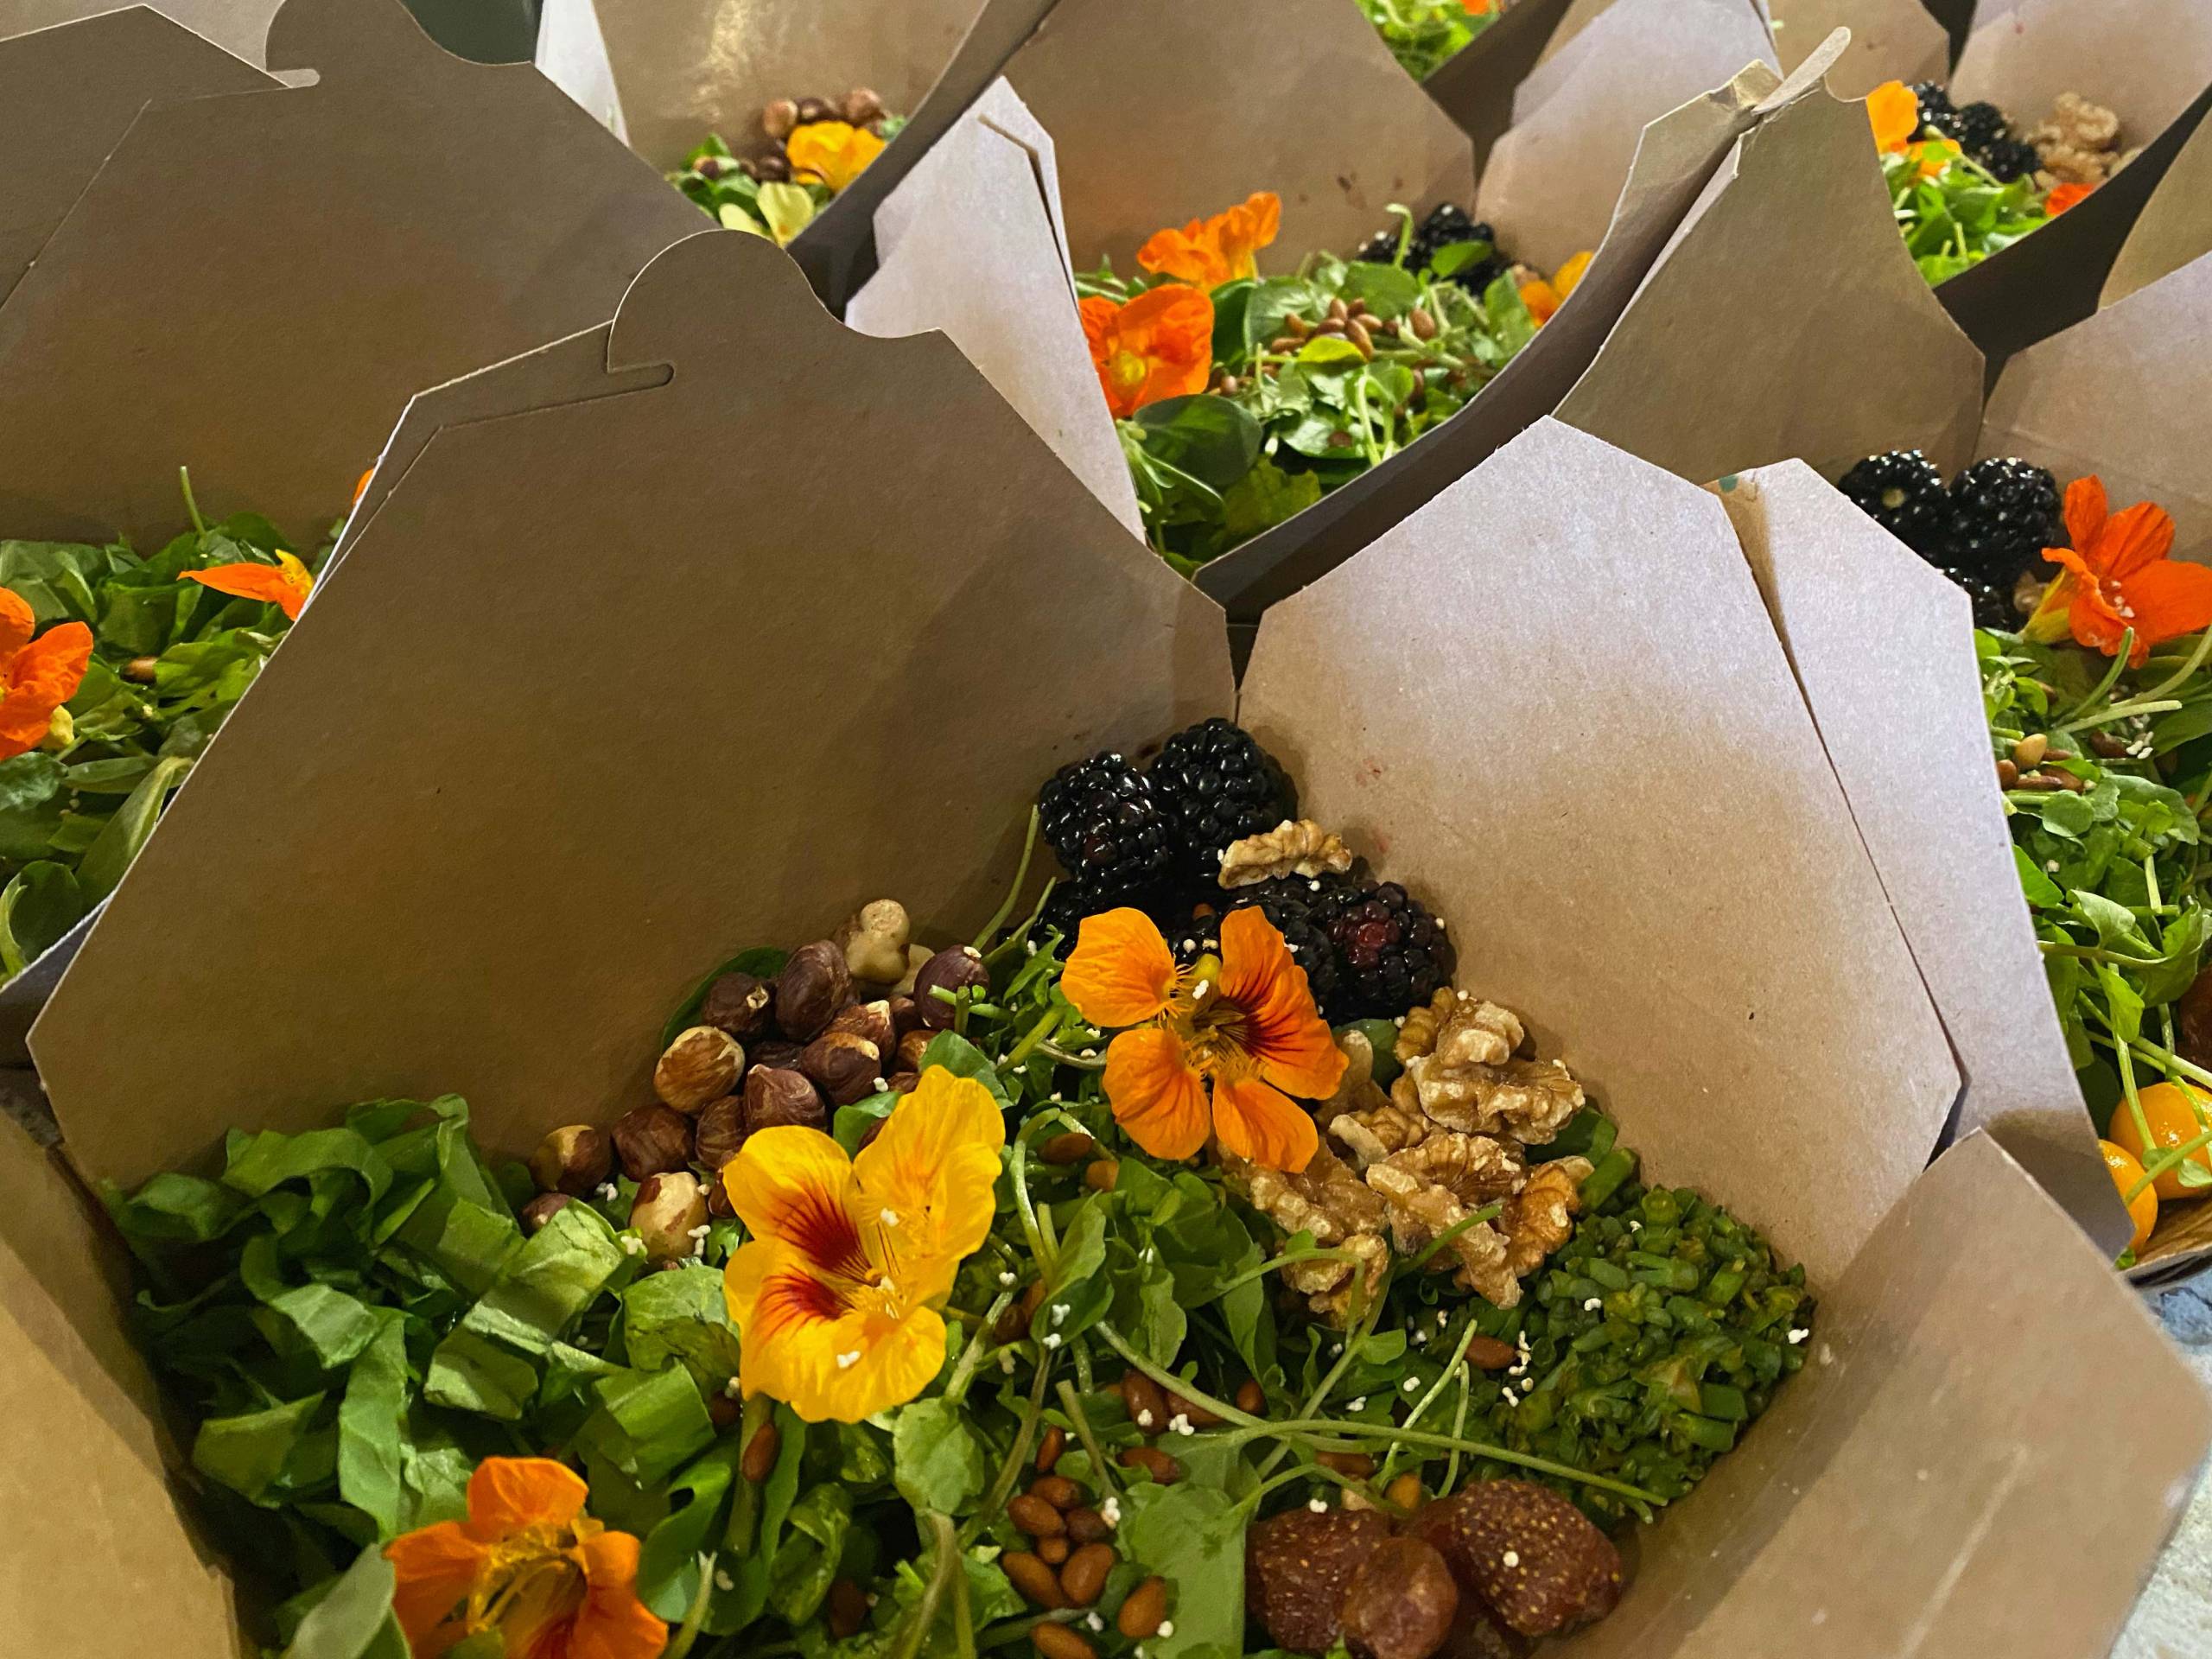 An Ohlone salad in a cardboard takeout box, with bright orange edible flowers and locally gathered greens and nuts.